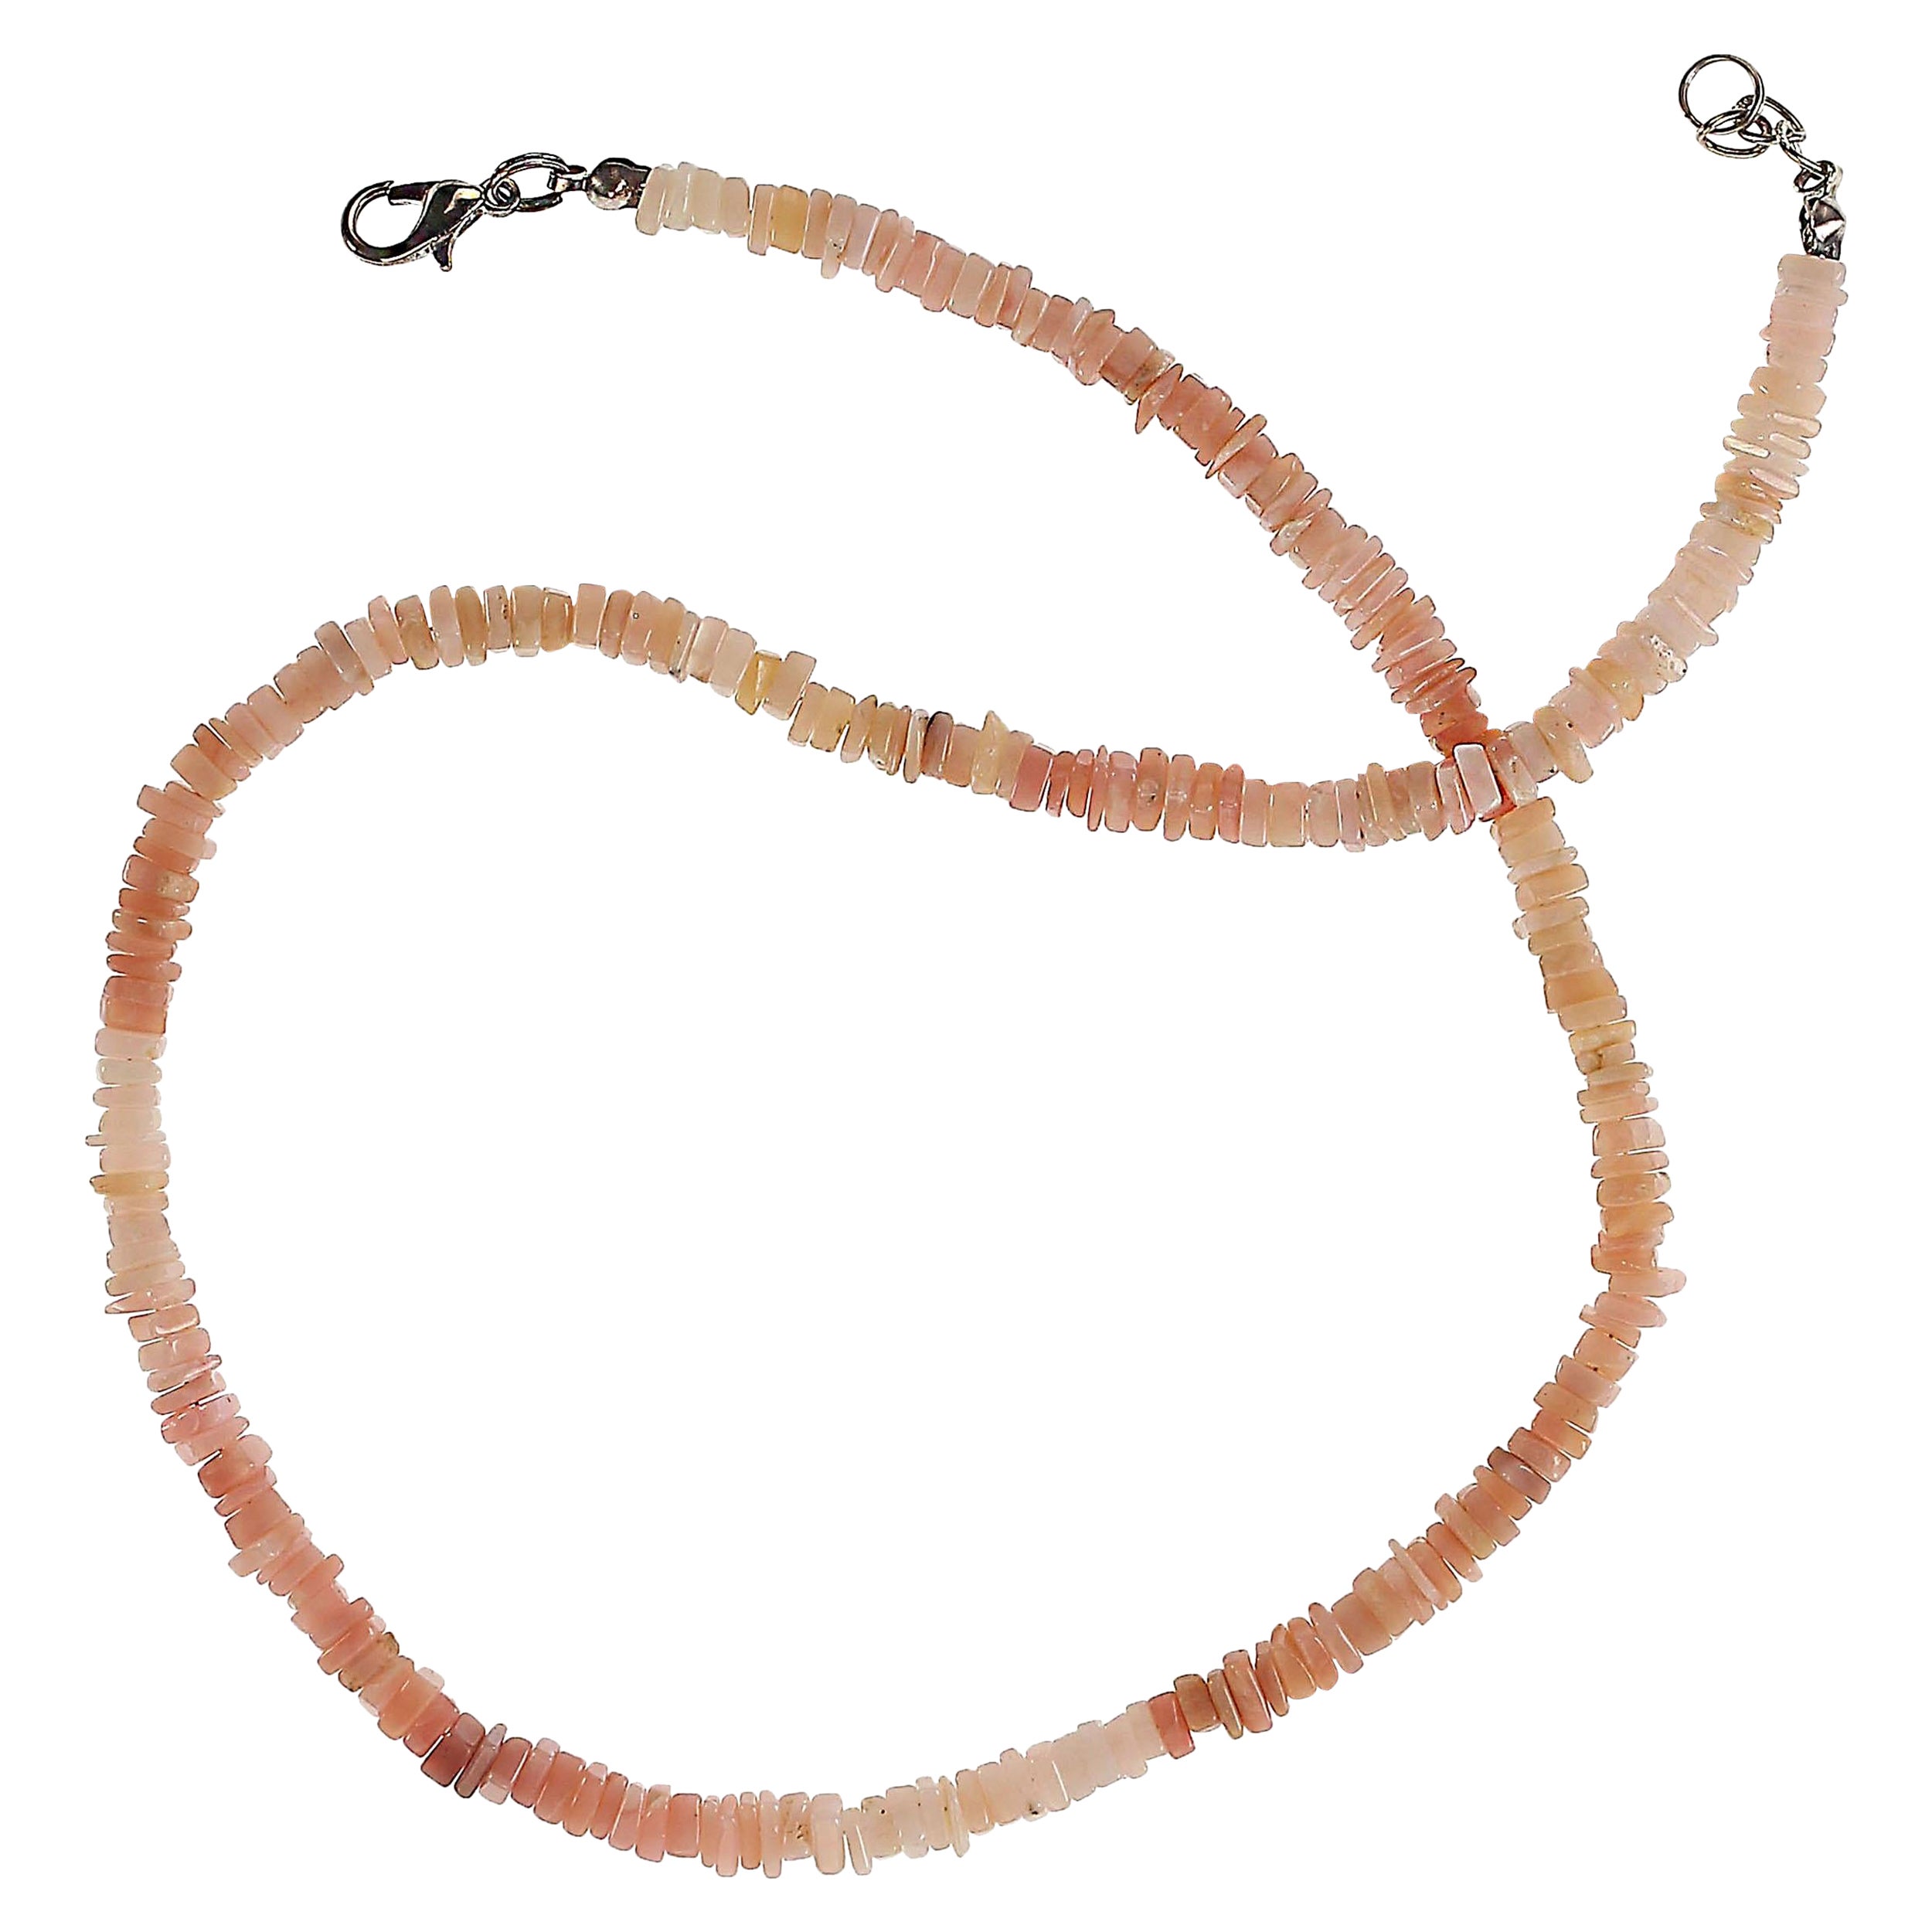 AJD 17 Inch Pink Peruvian Opal necklace      Great  Gift